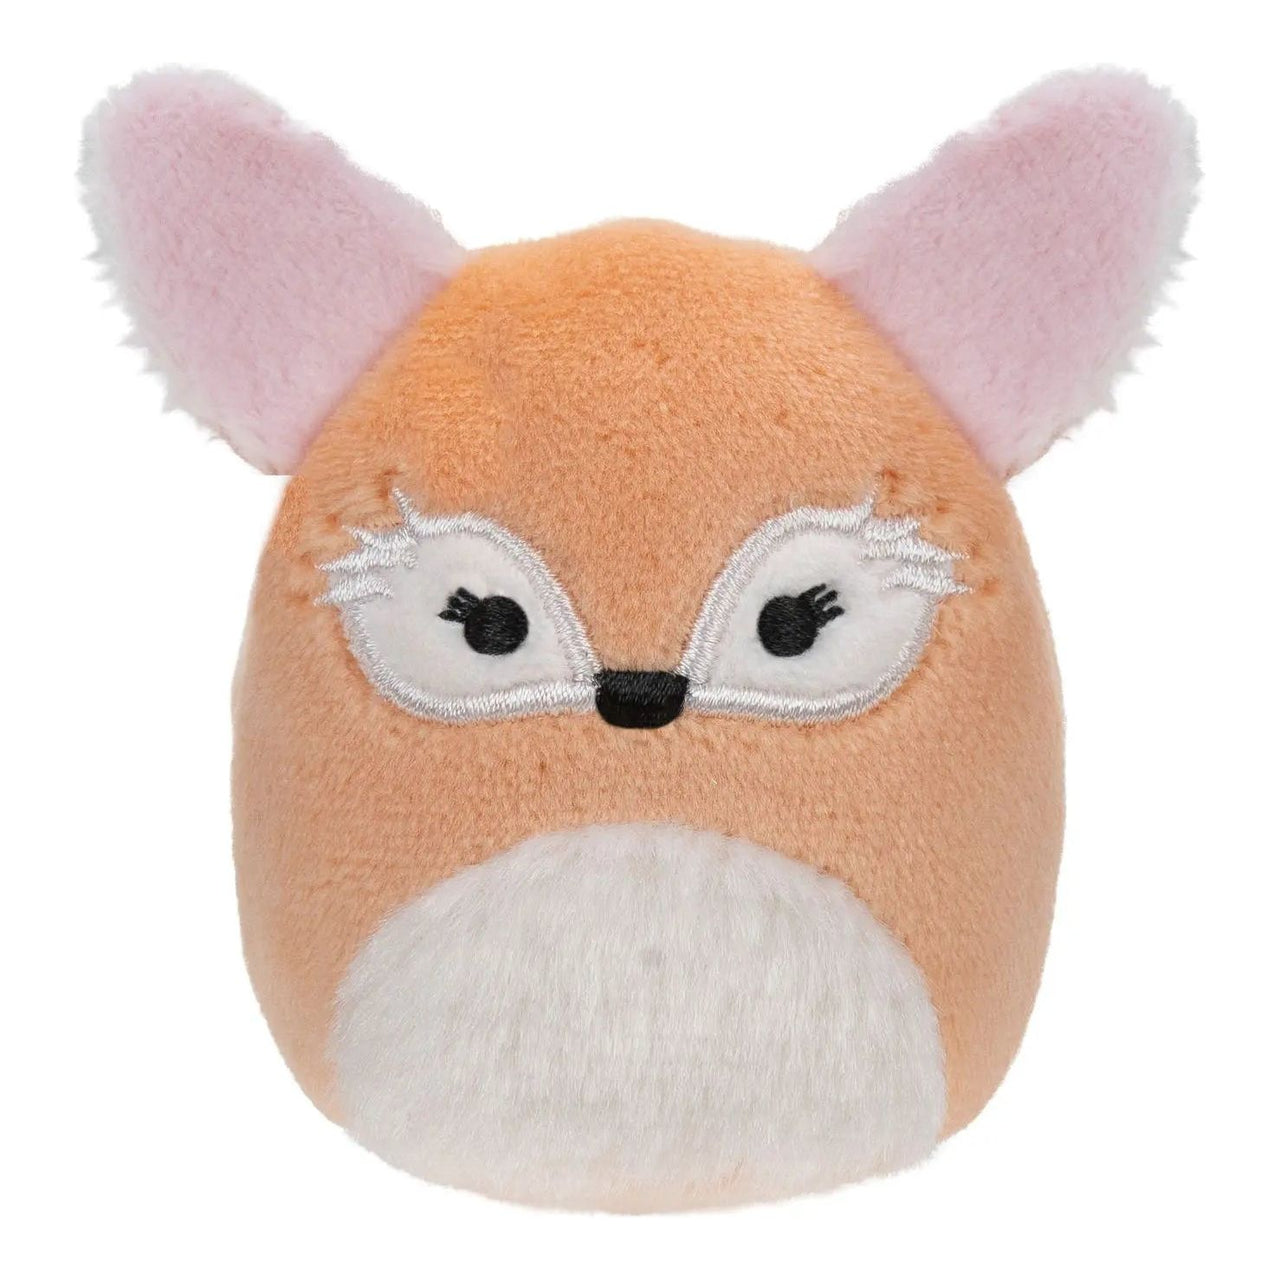 Squishville 2" Up All Night Squad 4 Pack Squishmallows